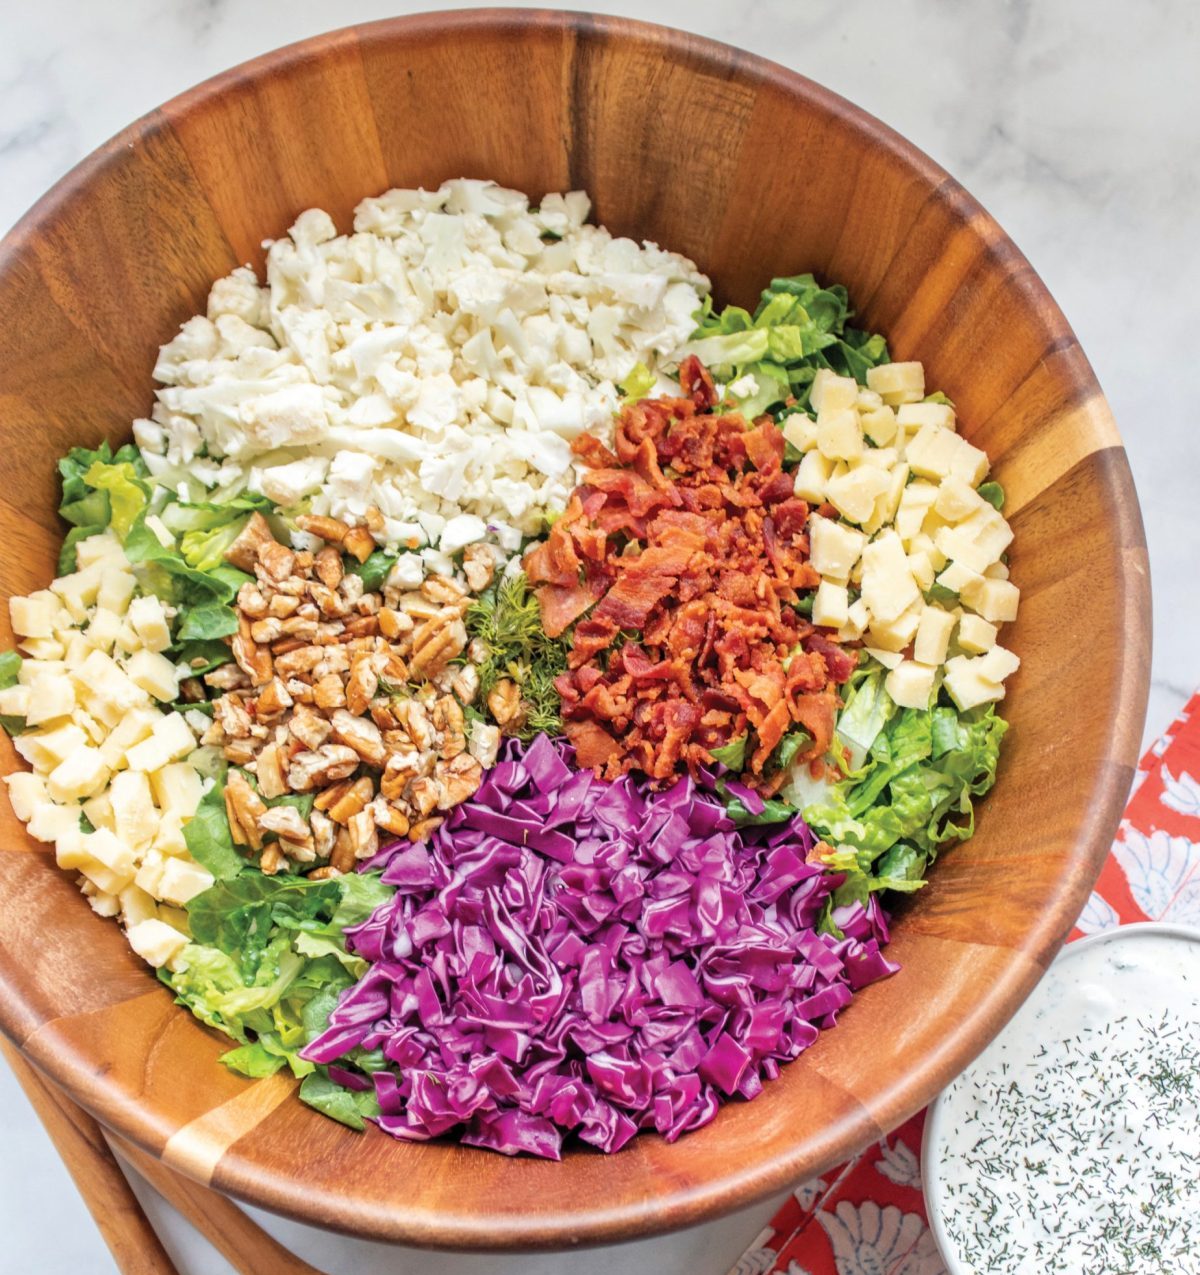 A wood bowl with salad ingredients, red cabbage, romaine lettuce, cauliflower, pecans, bacon and cheese. Beside the bowl are wood salad tongs and a coral napkin.